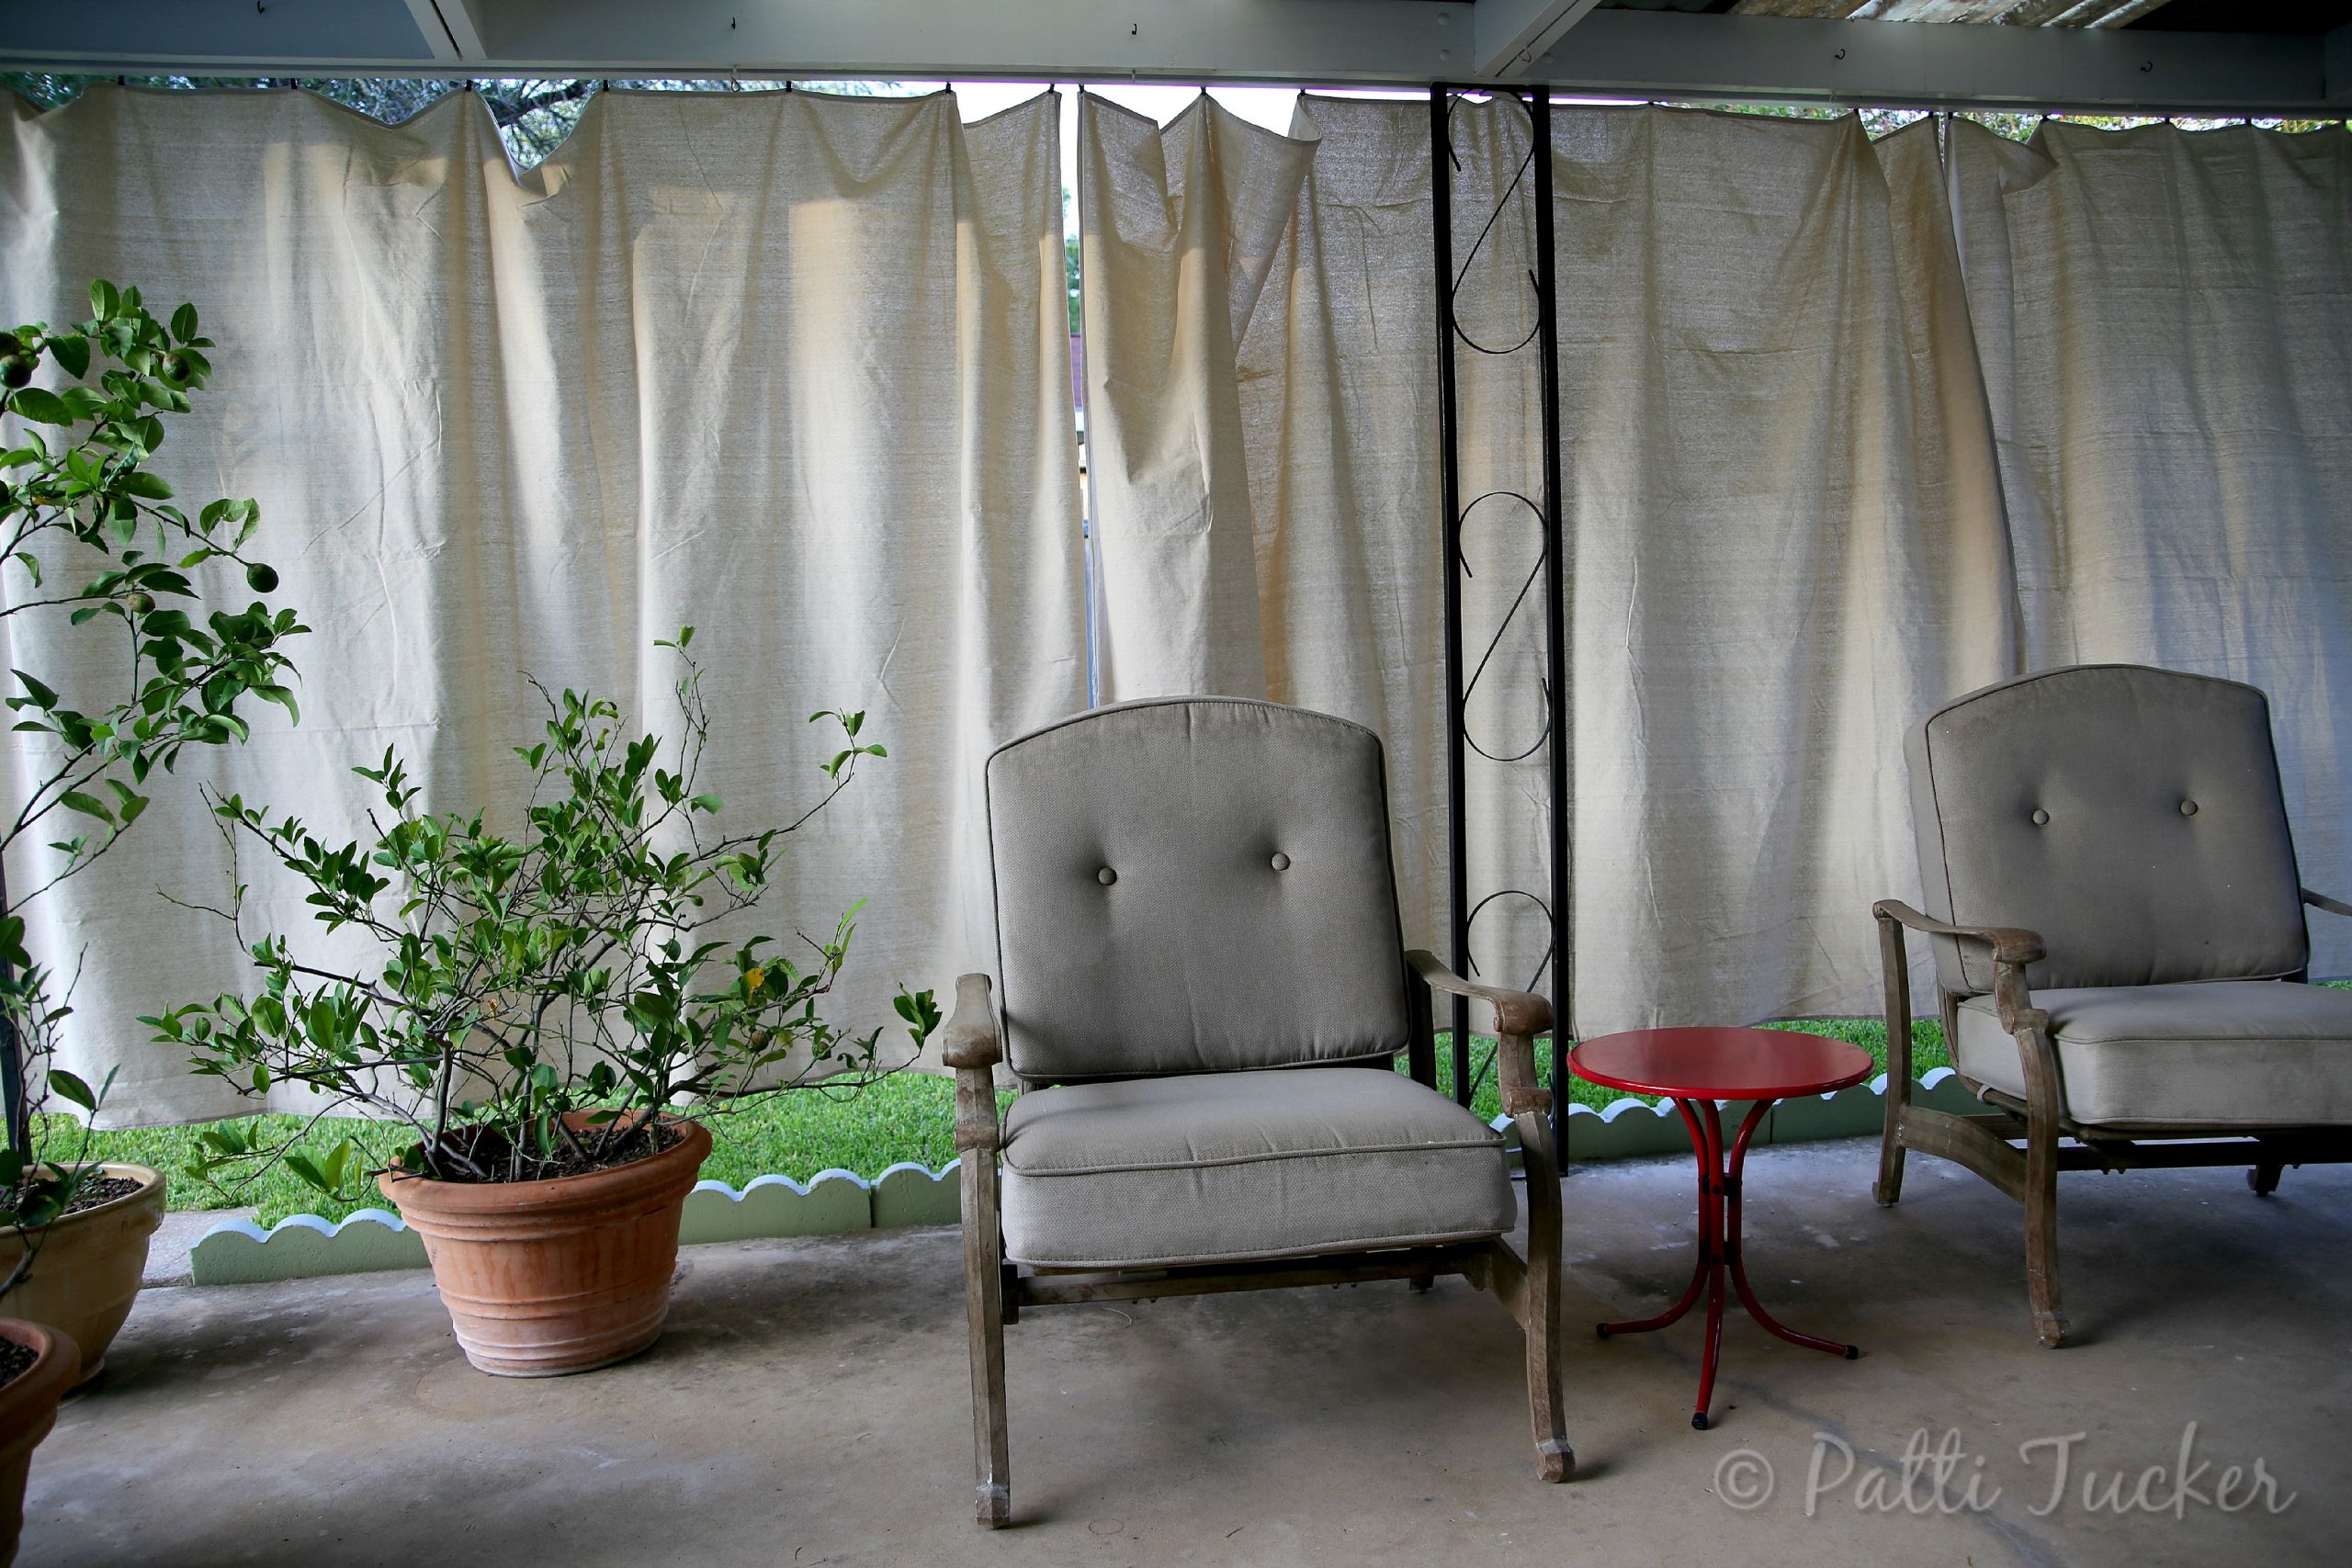 DIY Outdoor Curtains For Patio
 Inexpensive DIY Outdoor Patio Drop Cloth Curtains